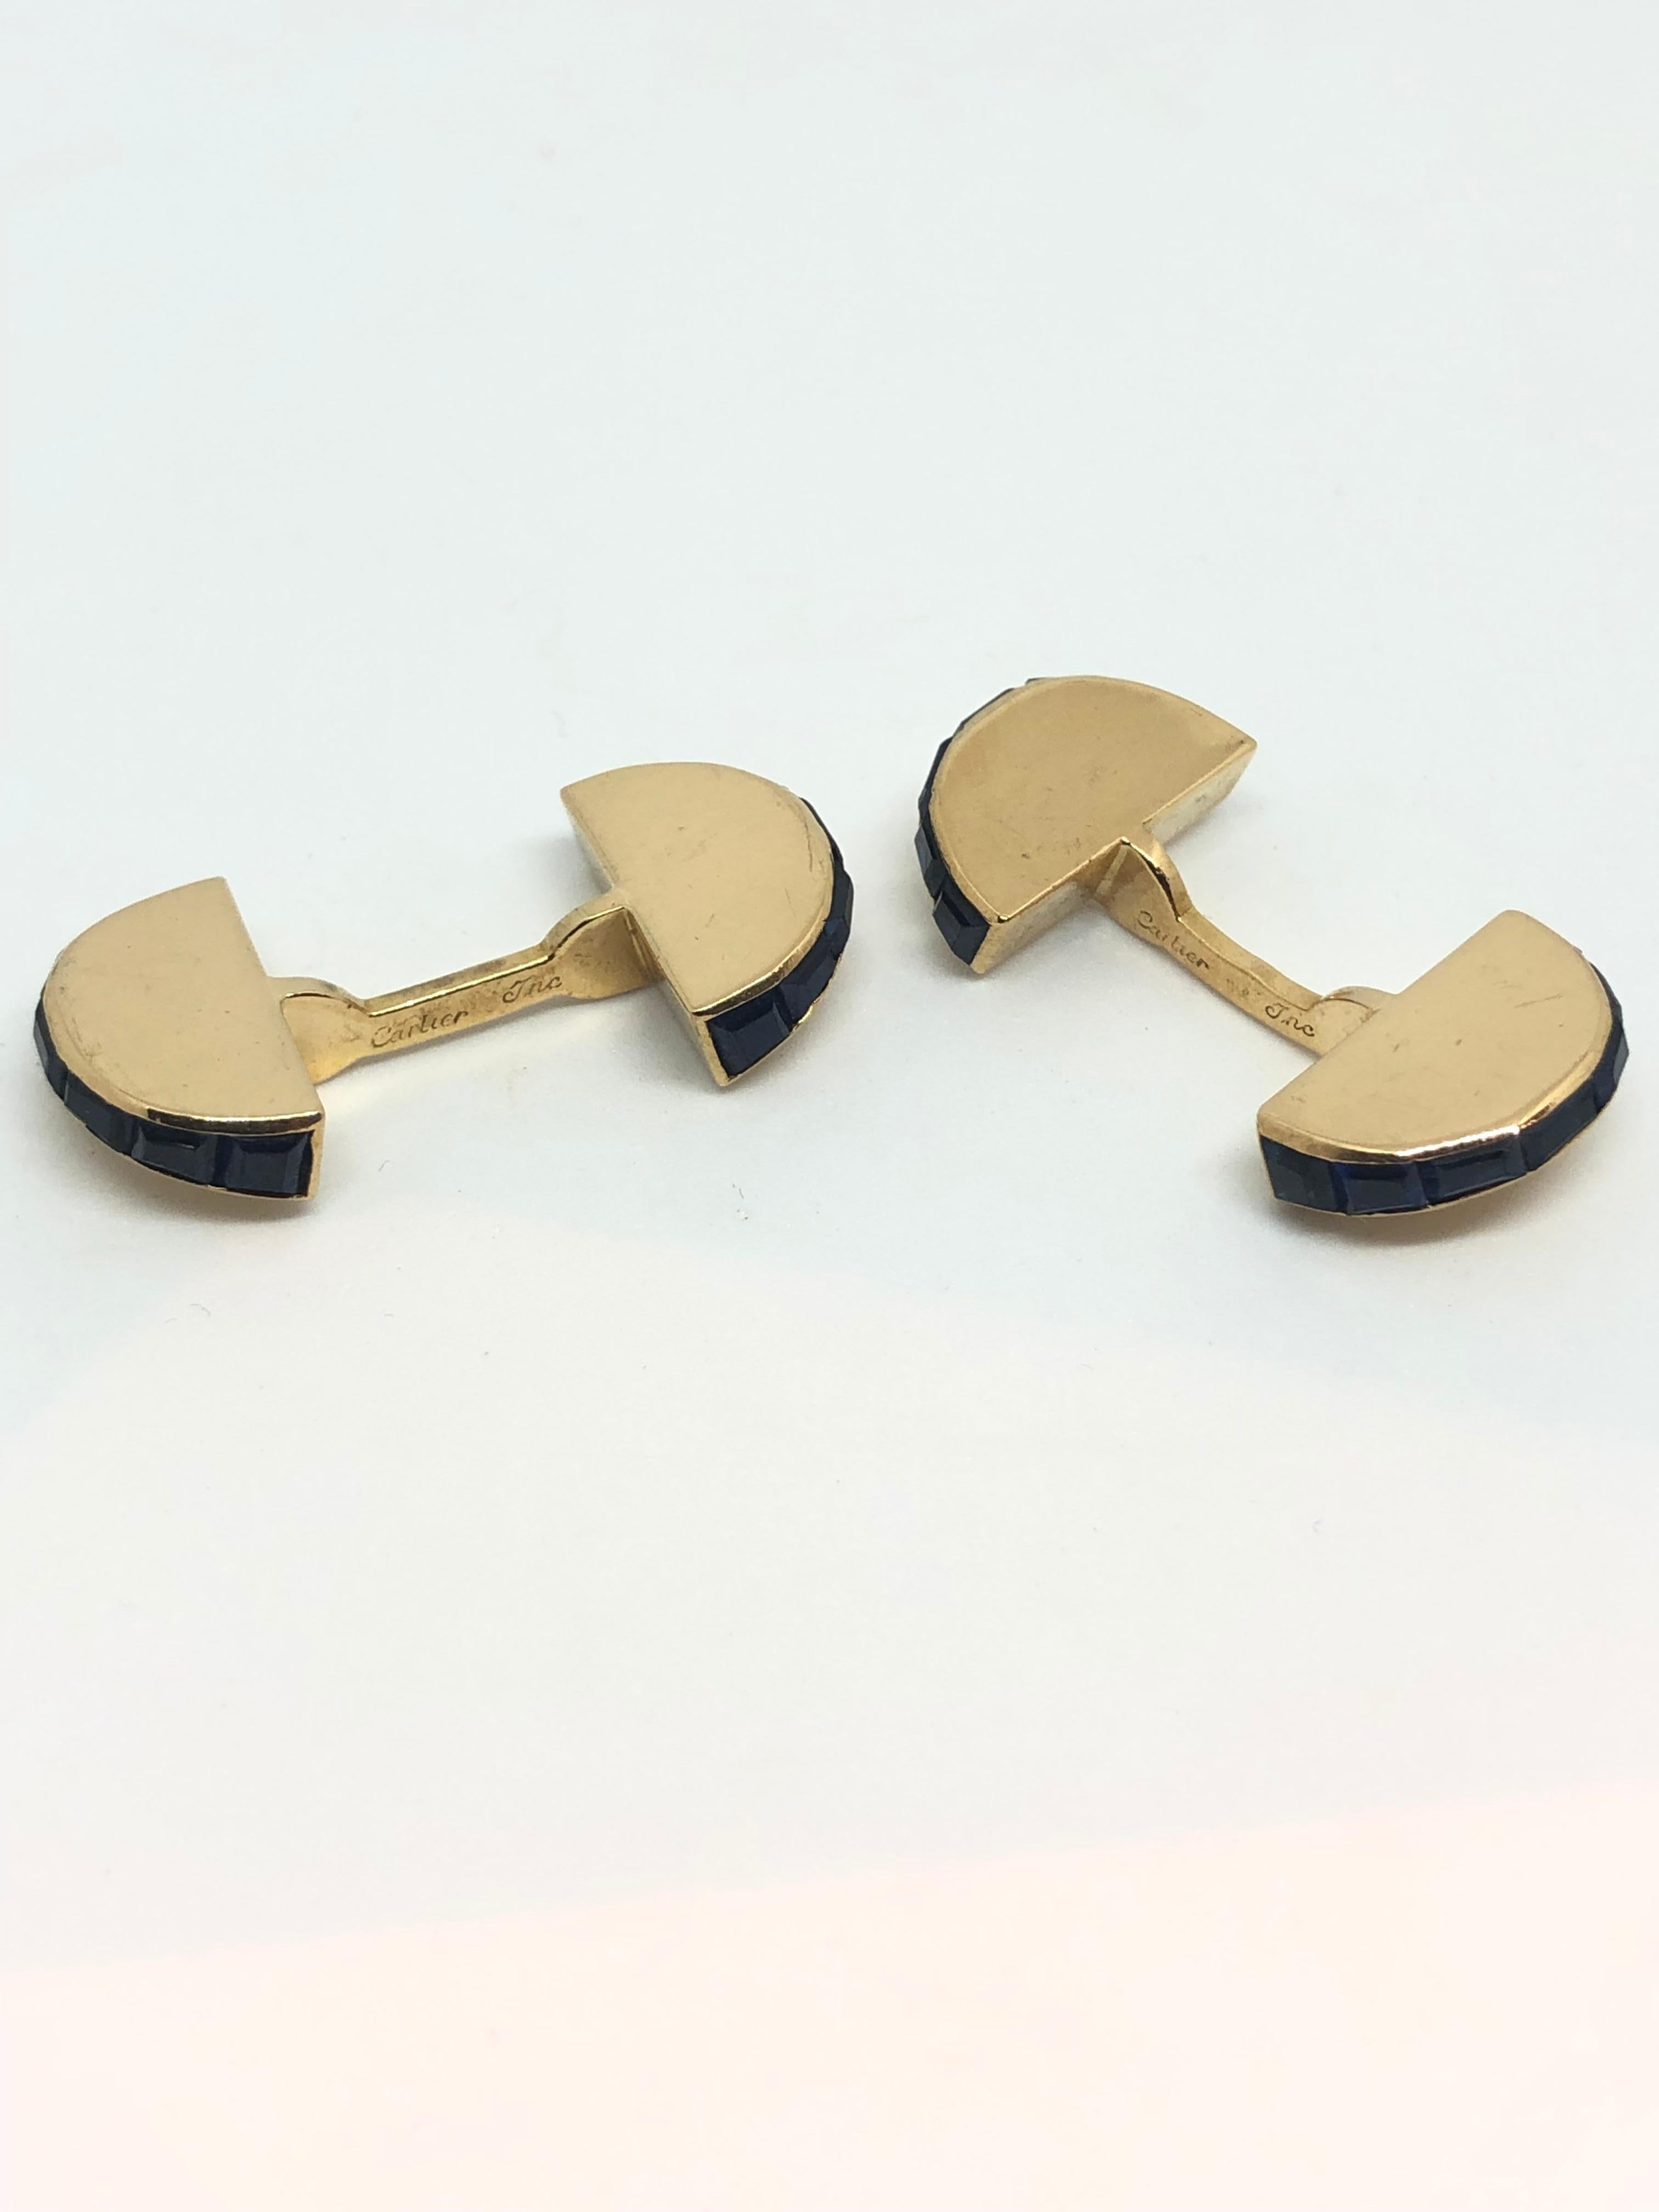 A pair of 18k gold cufflinks featuring sapphire crafted by Cartier.
Cufflinks top measure 15mm x 8,5mm.
Marked Cartier, French marks.
Weight: 9.46 grams.